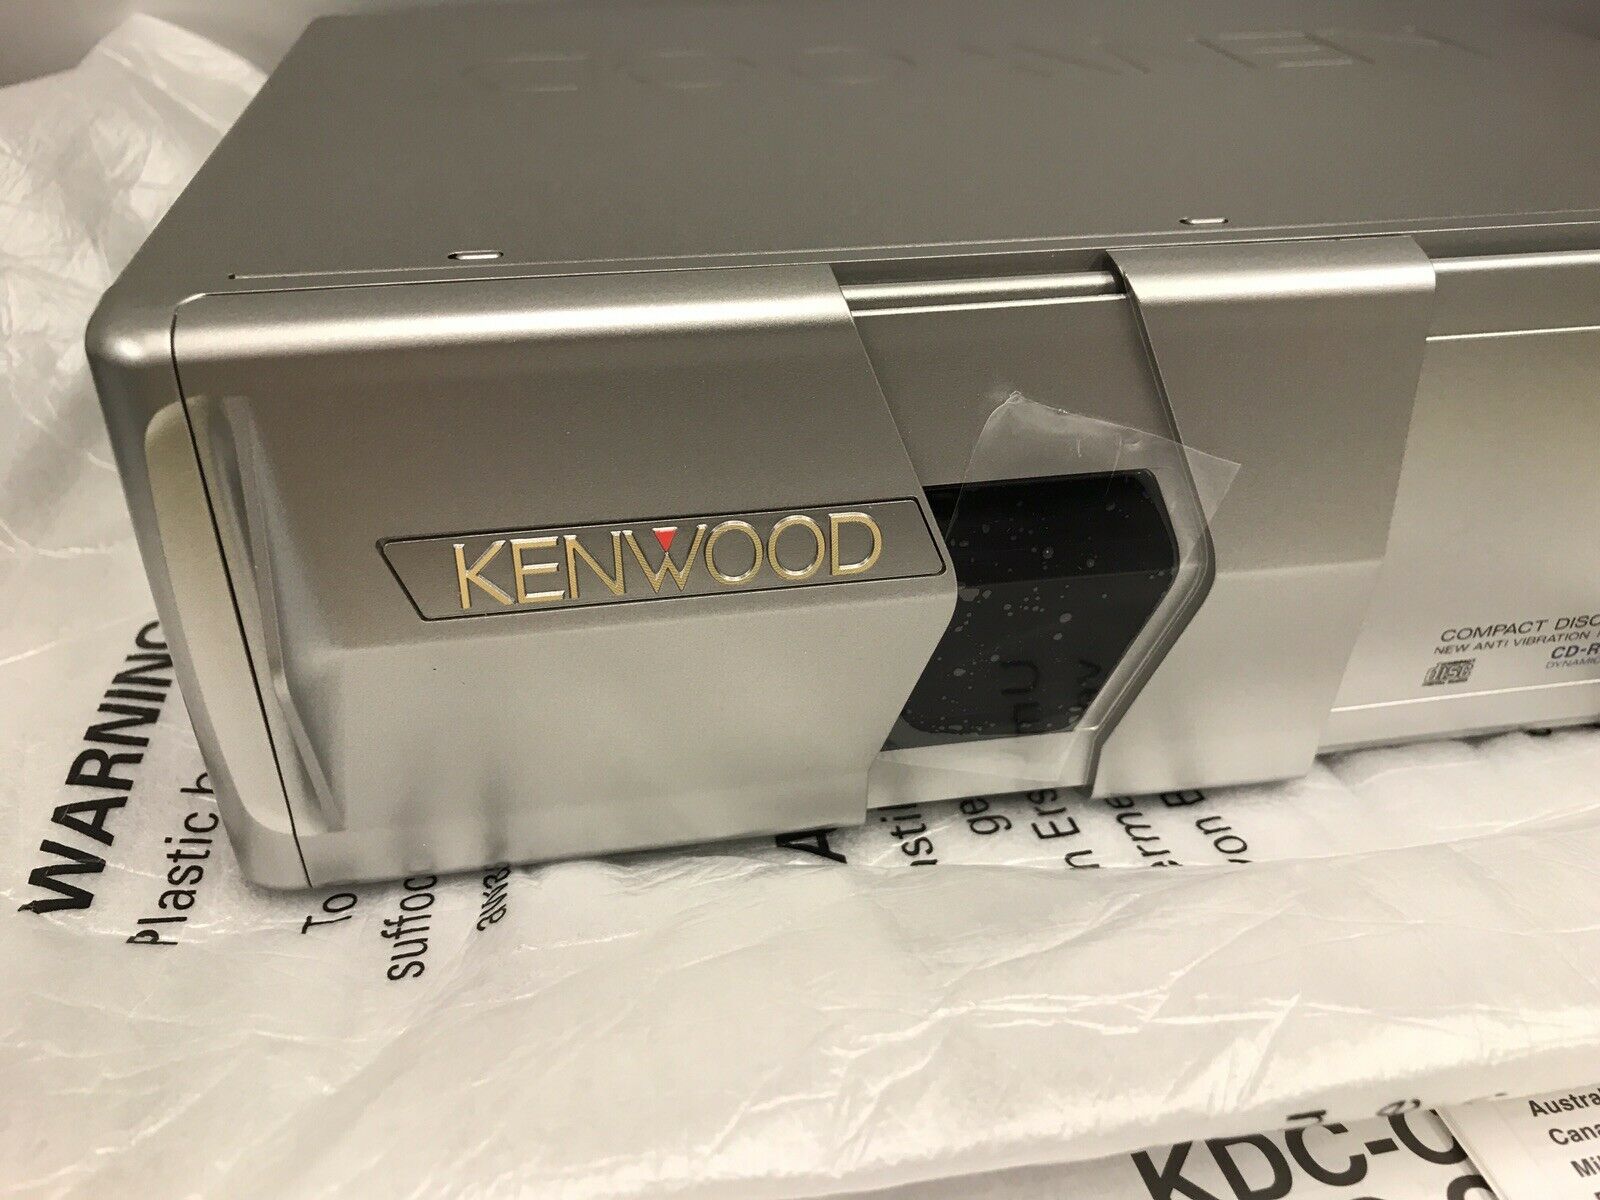 Kenwood Rare New Kdc-Cps87 Car Radio Stereo 10 Disc Plug In Add On Cd Changer